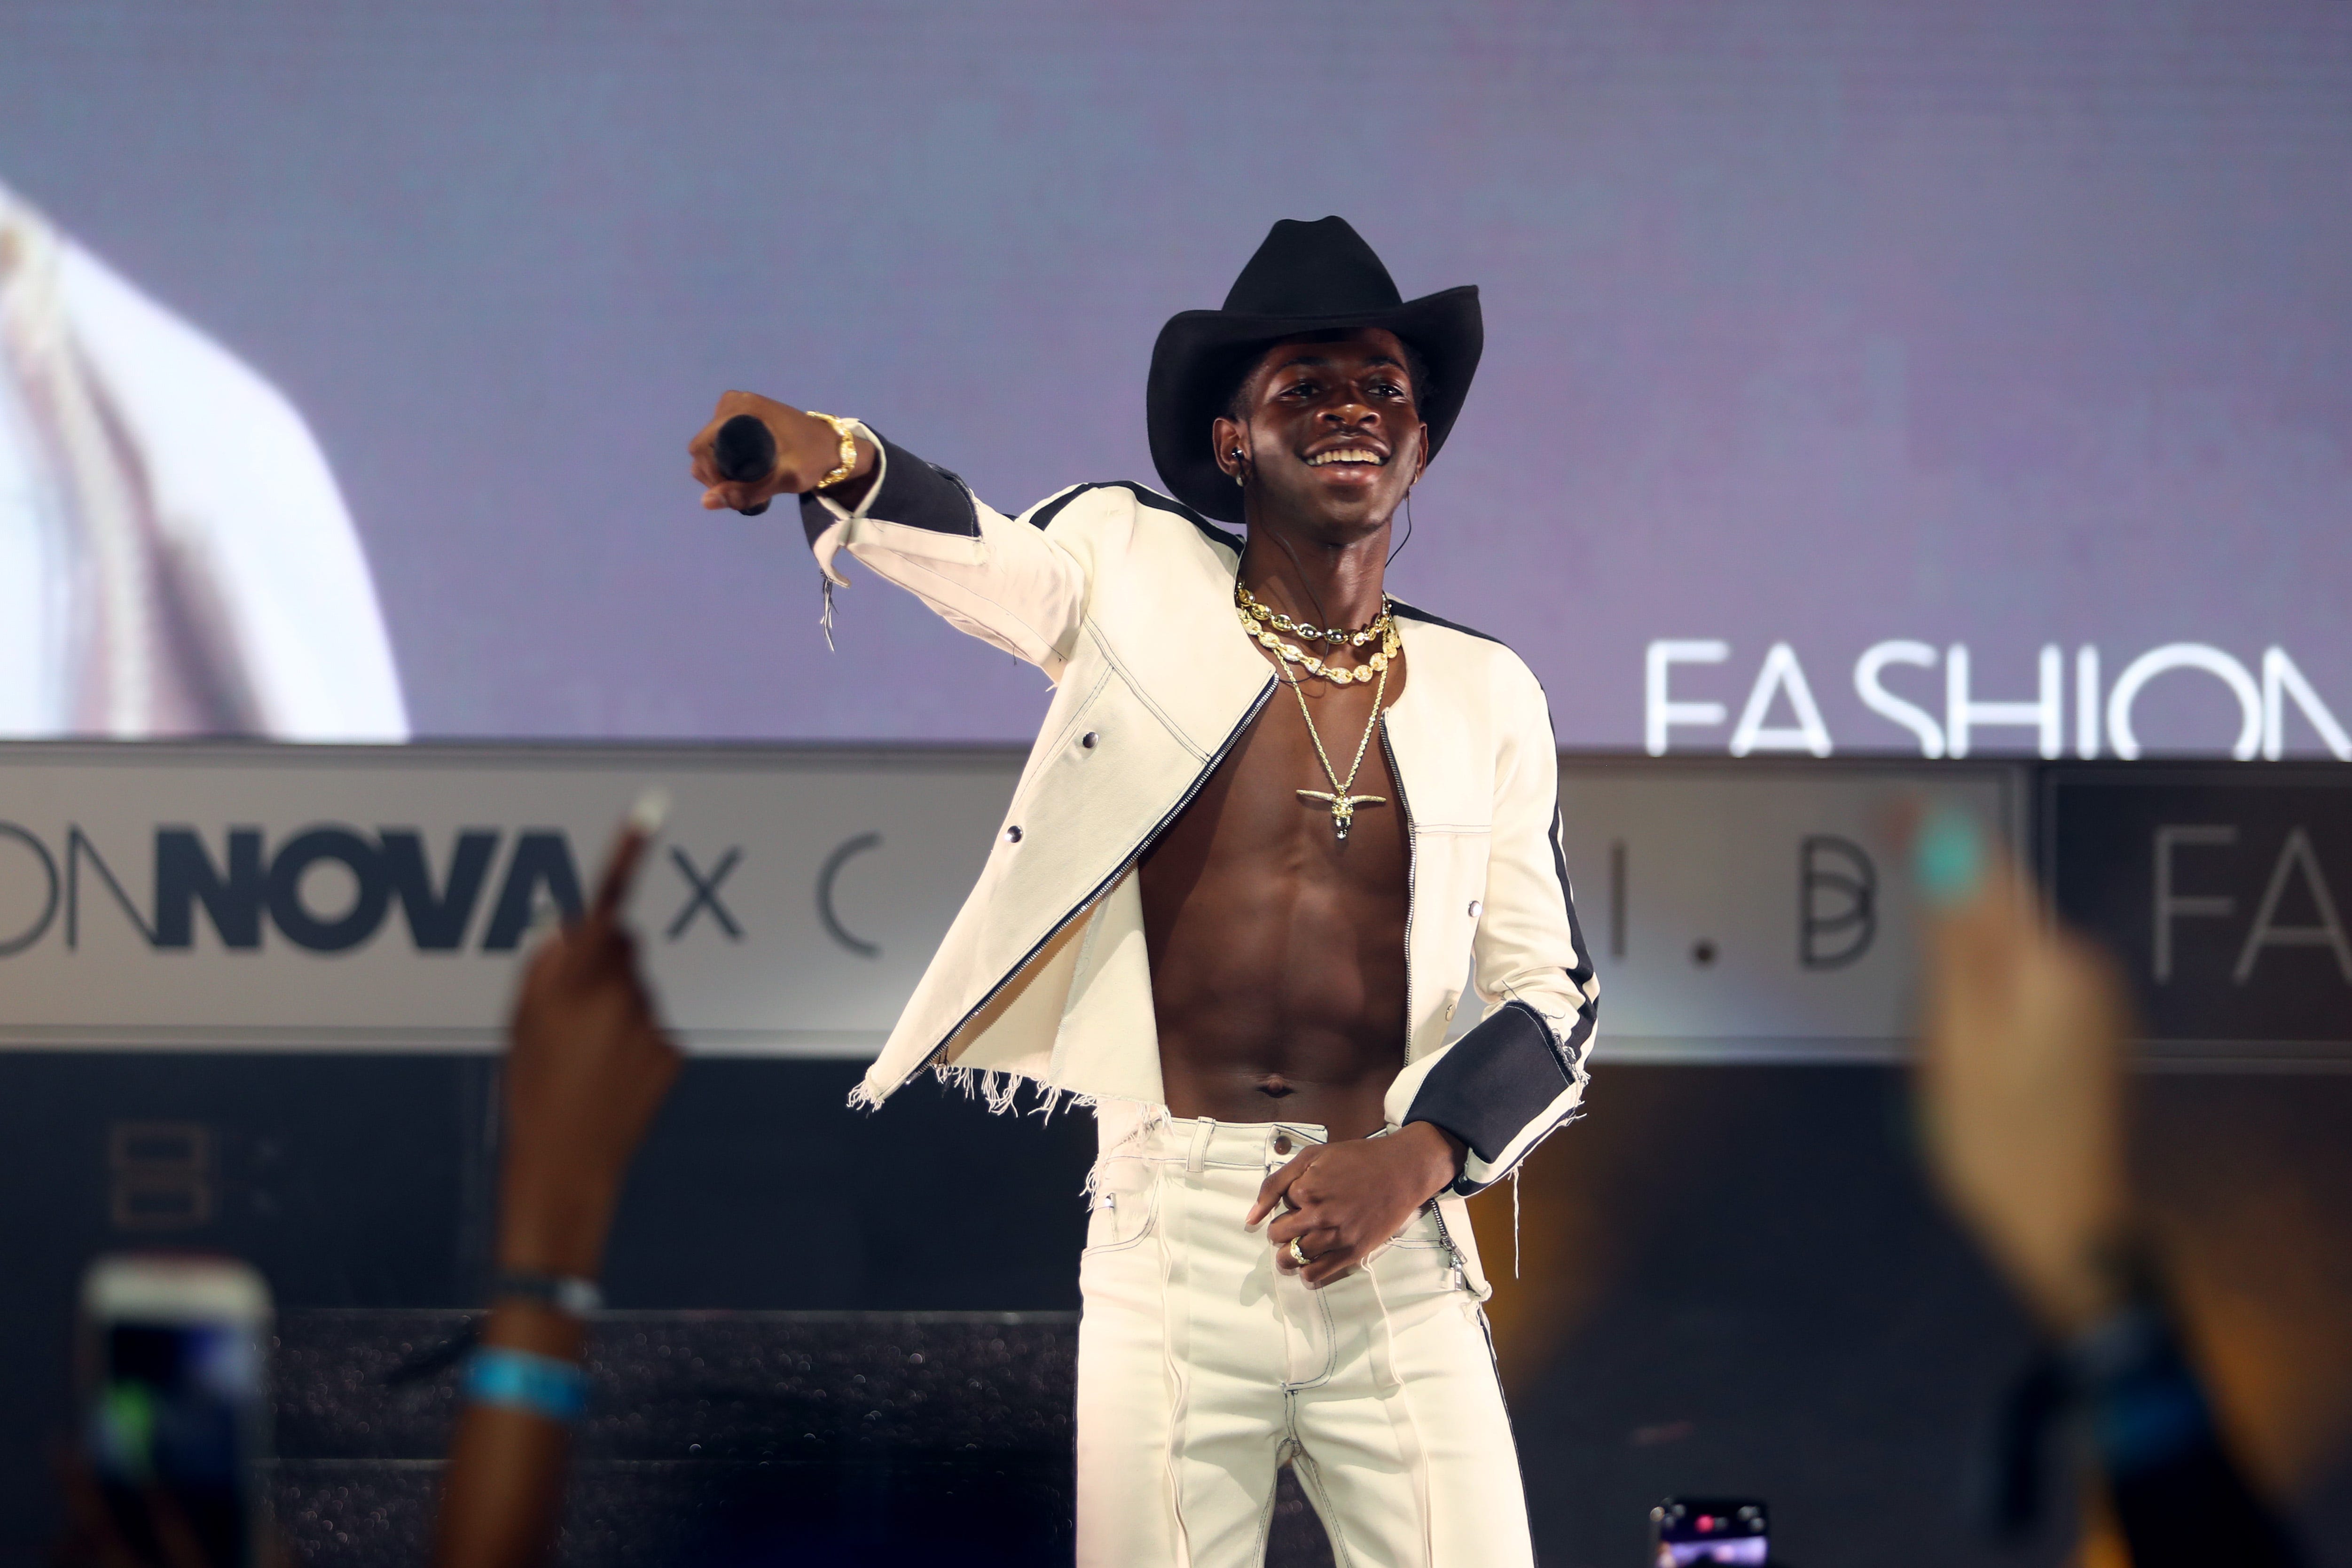 Lil Nas X surprises Ohio school with epic 'Old Town Road' performance